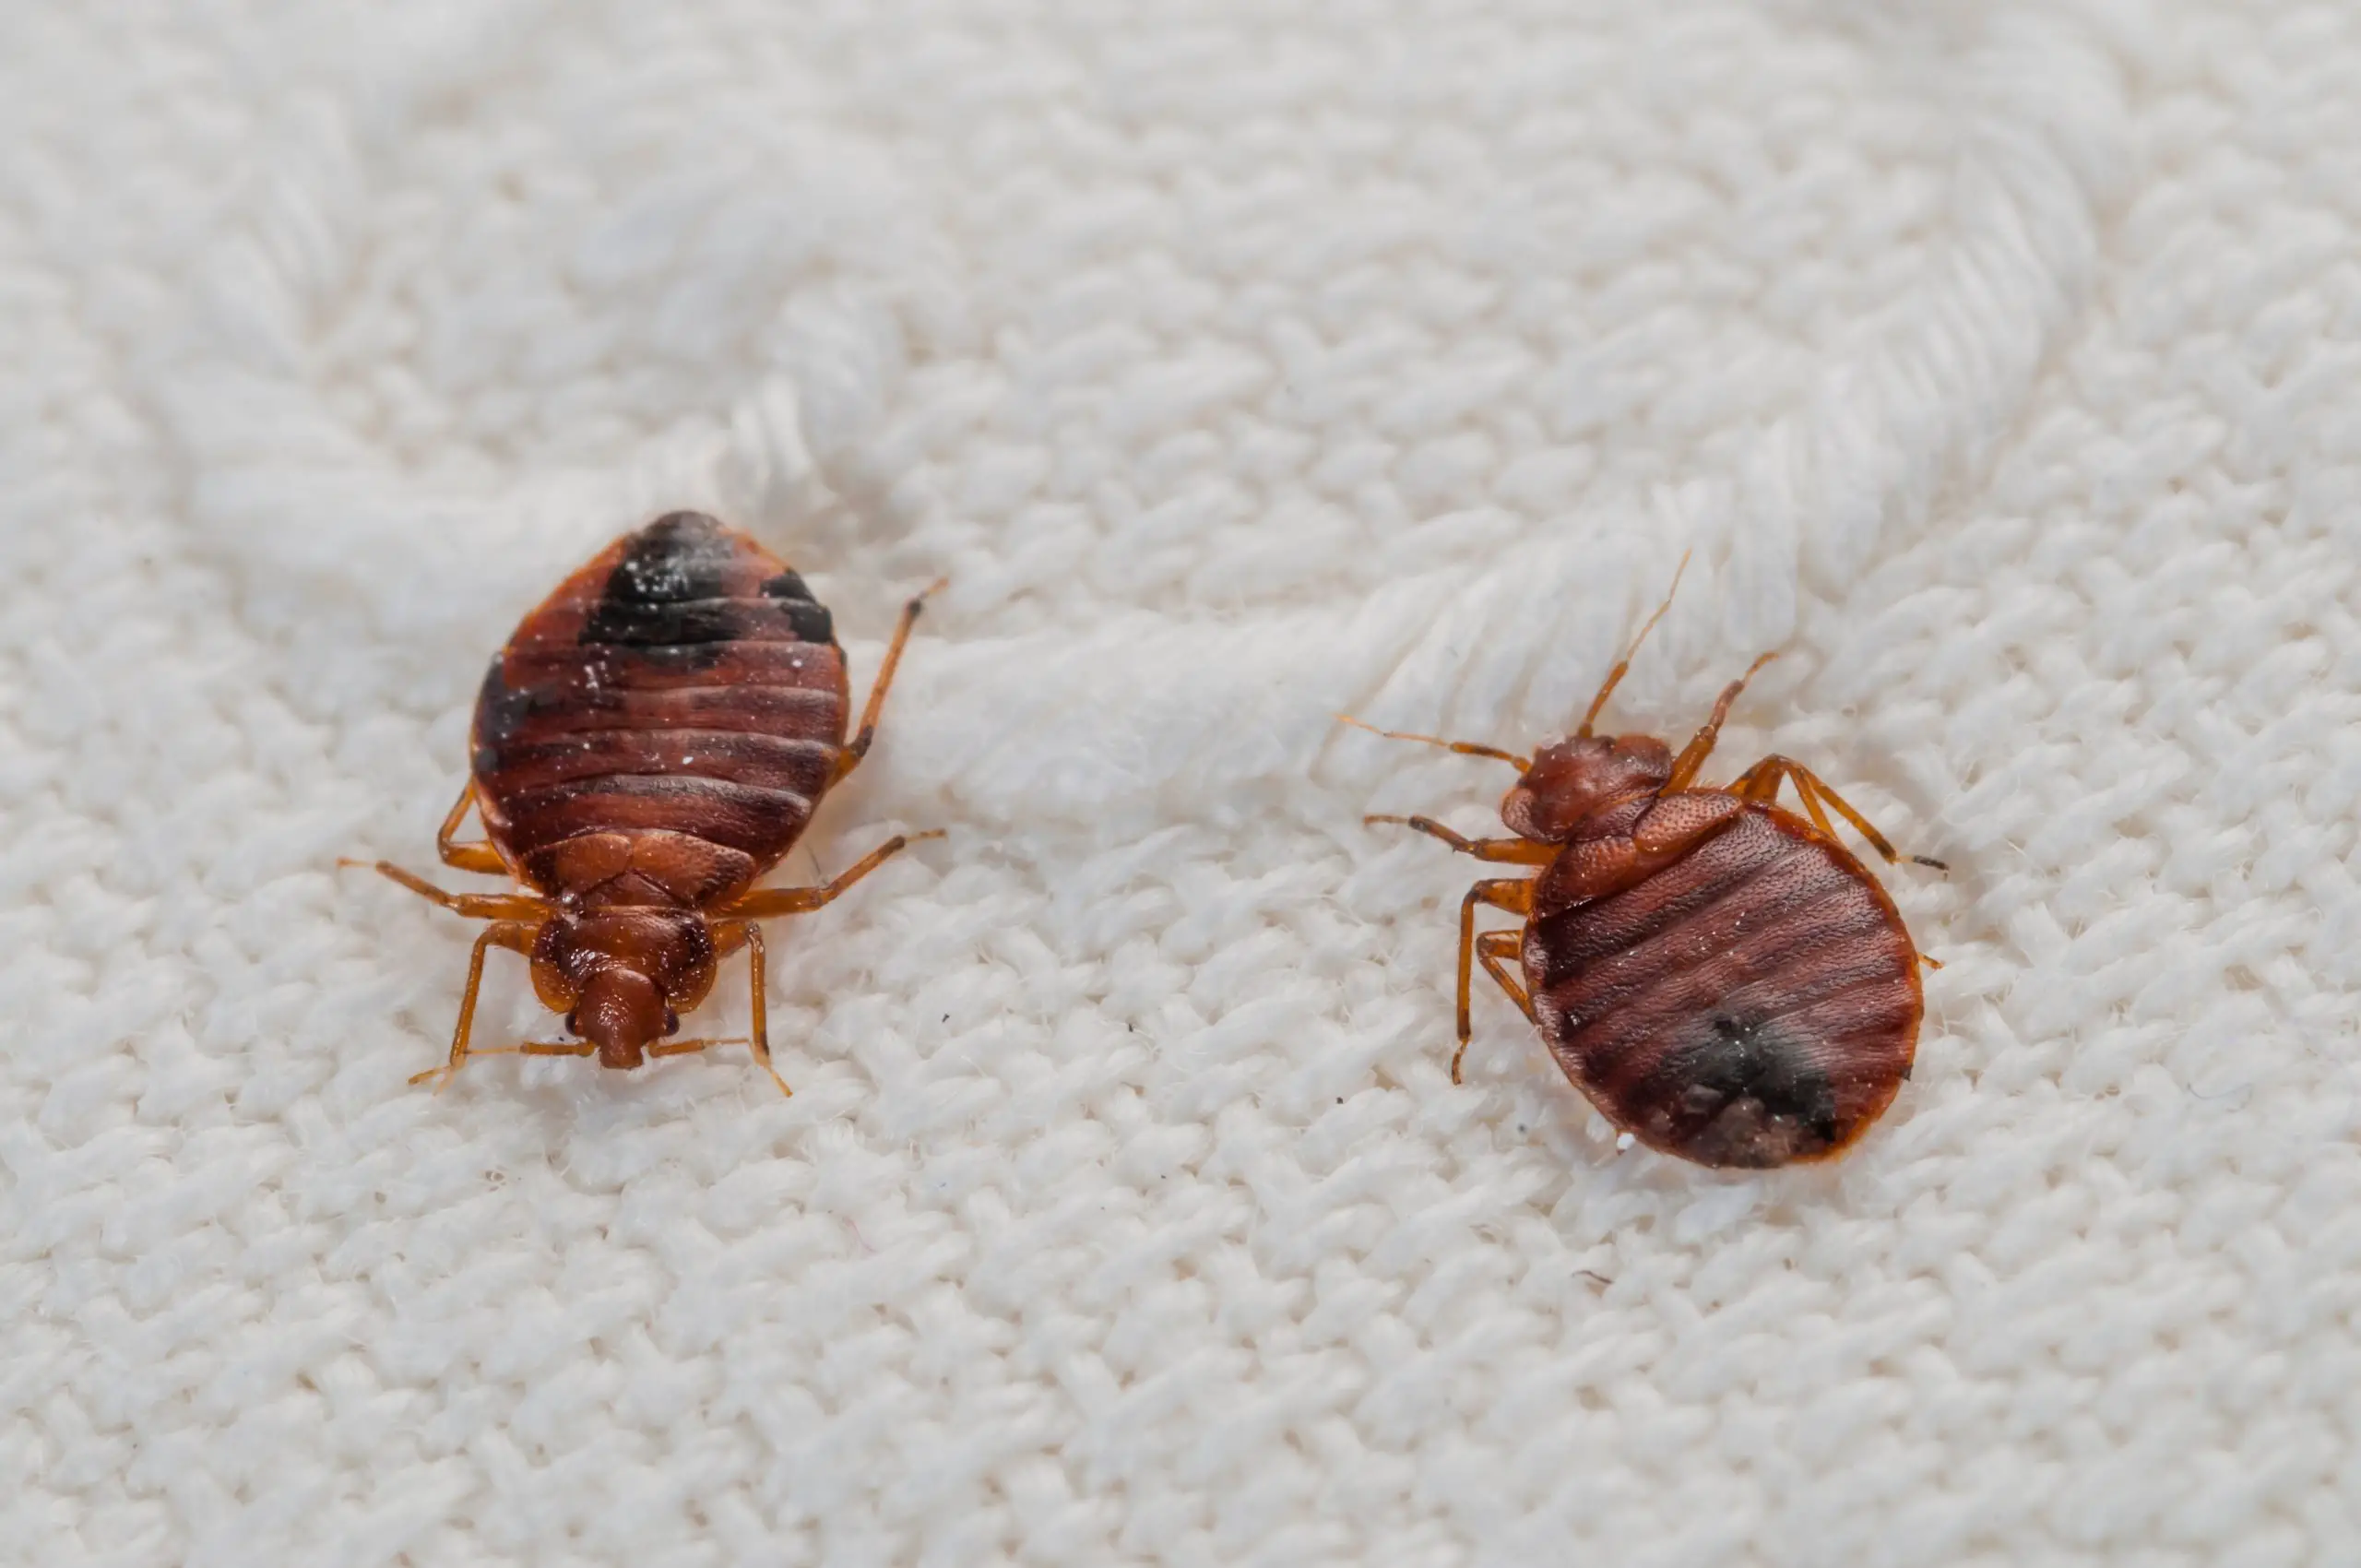 Where Does Bed Bugs Lay Their Eggs?